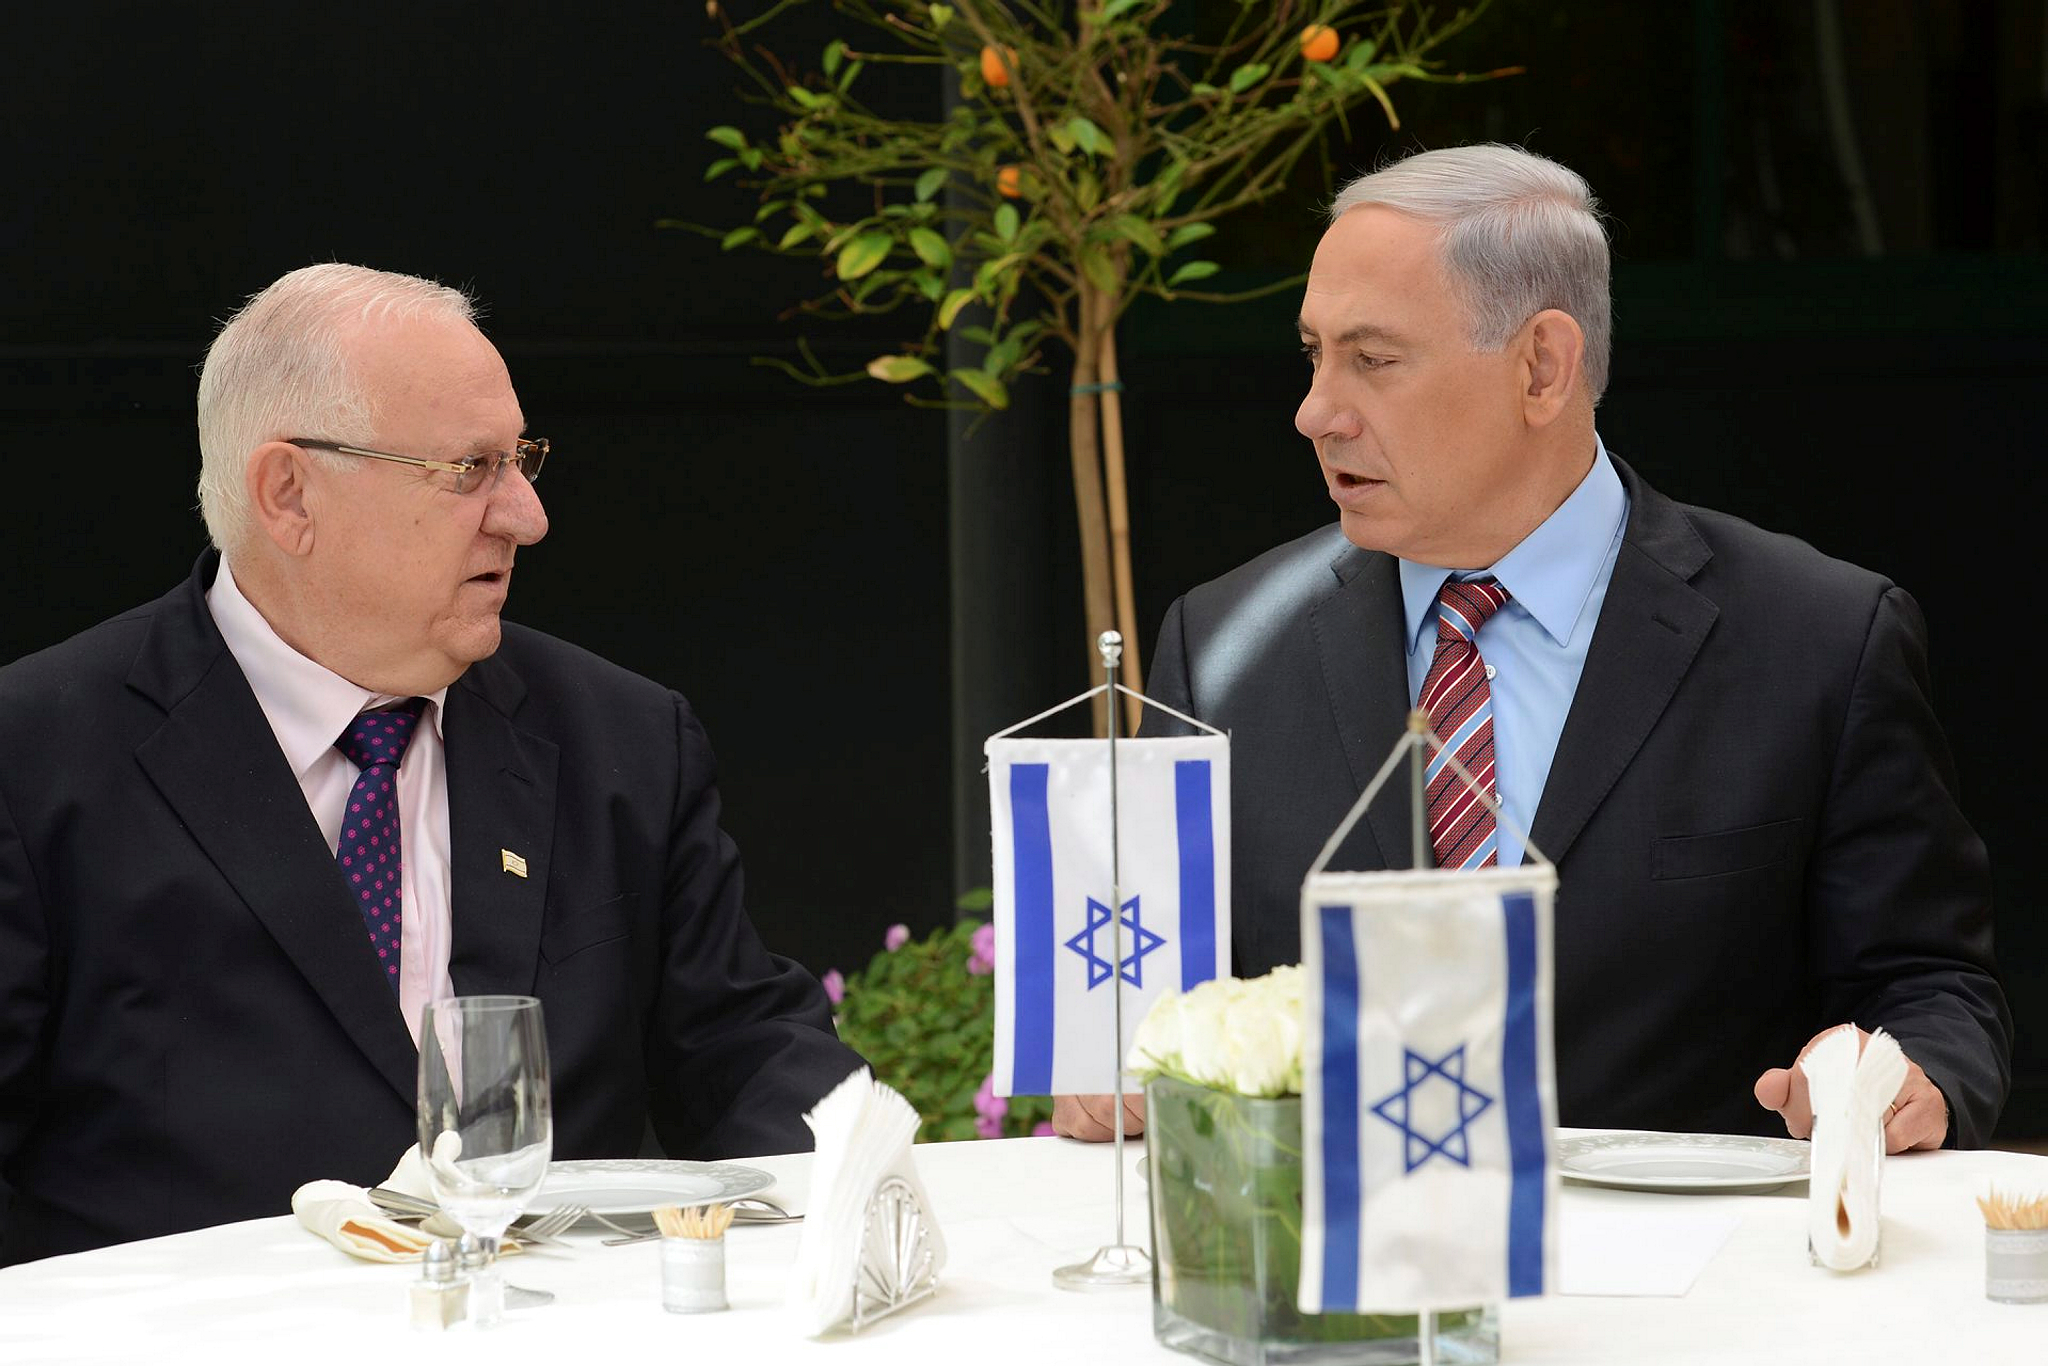 Newly elected president Reuven Rivlin (L) seen with Israeli Prime Minister Benjamin Netanyahu, a day after winning a vote held in the Israeli parliament to become the 10th President of the State of Israel. Photo by Flash90